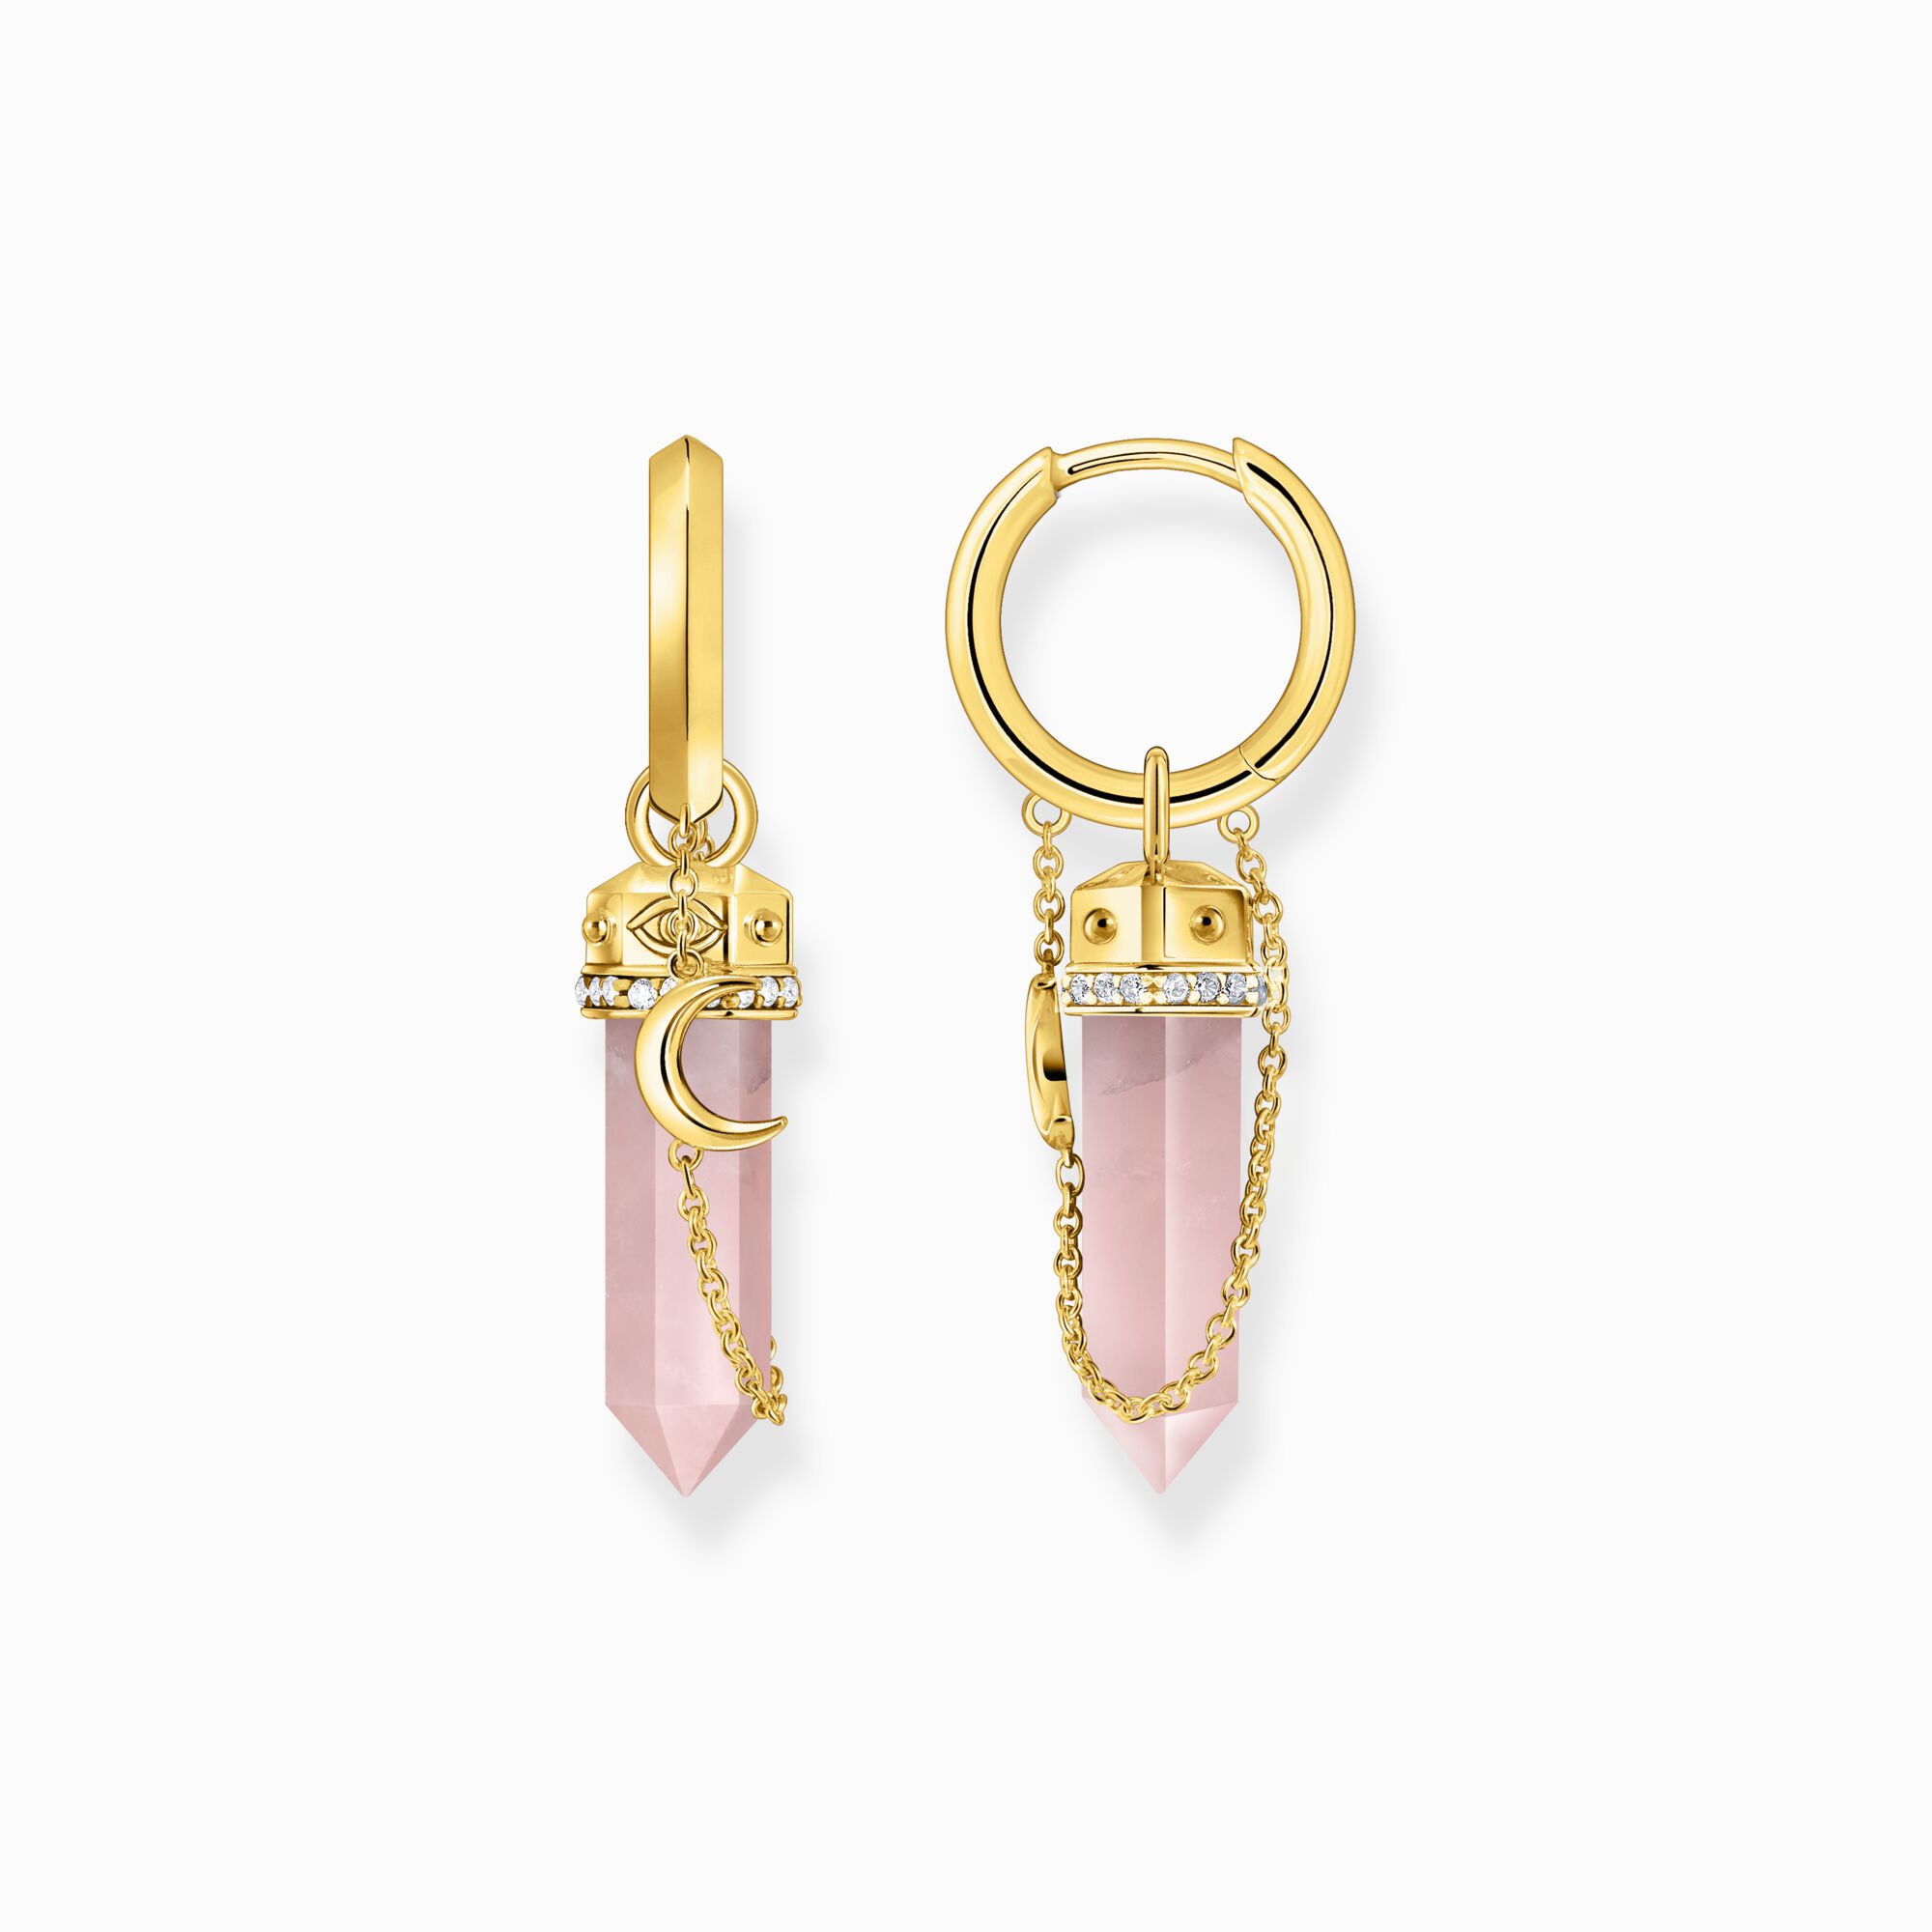 Gold-plated hexagonal hoop earring with rose quartz from the  collection in the THOMAS SABO online store